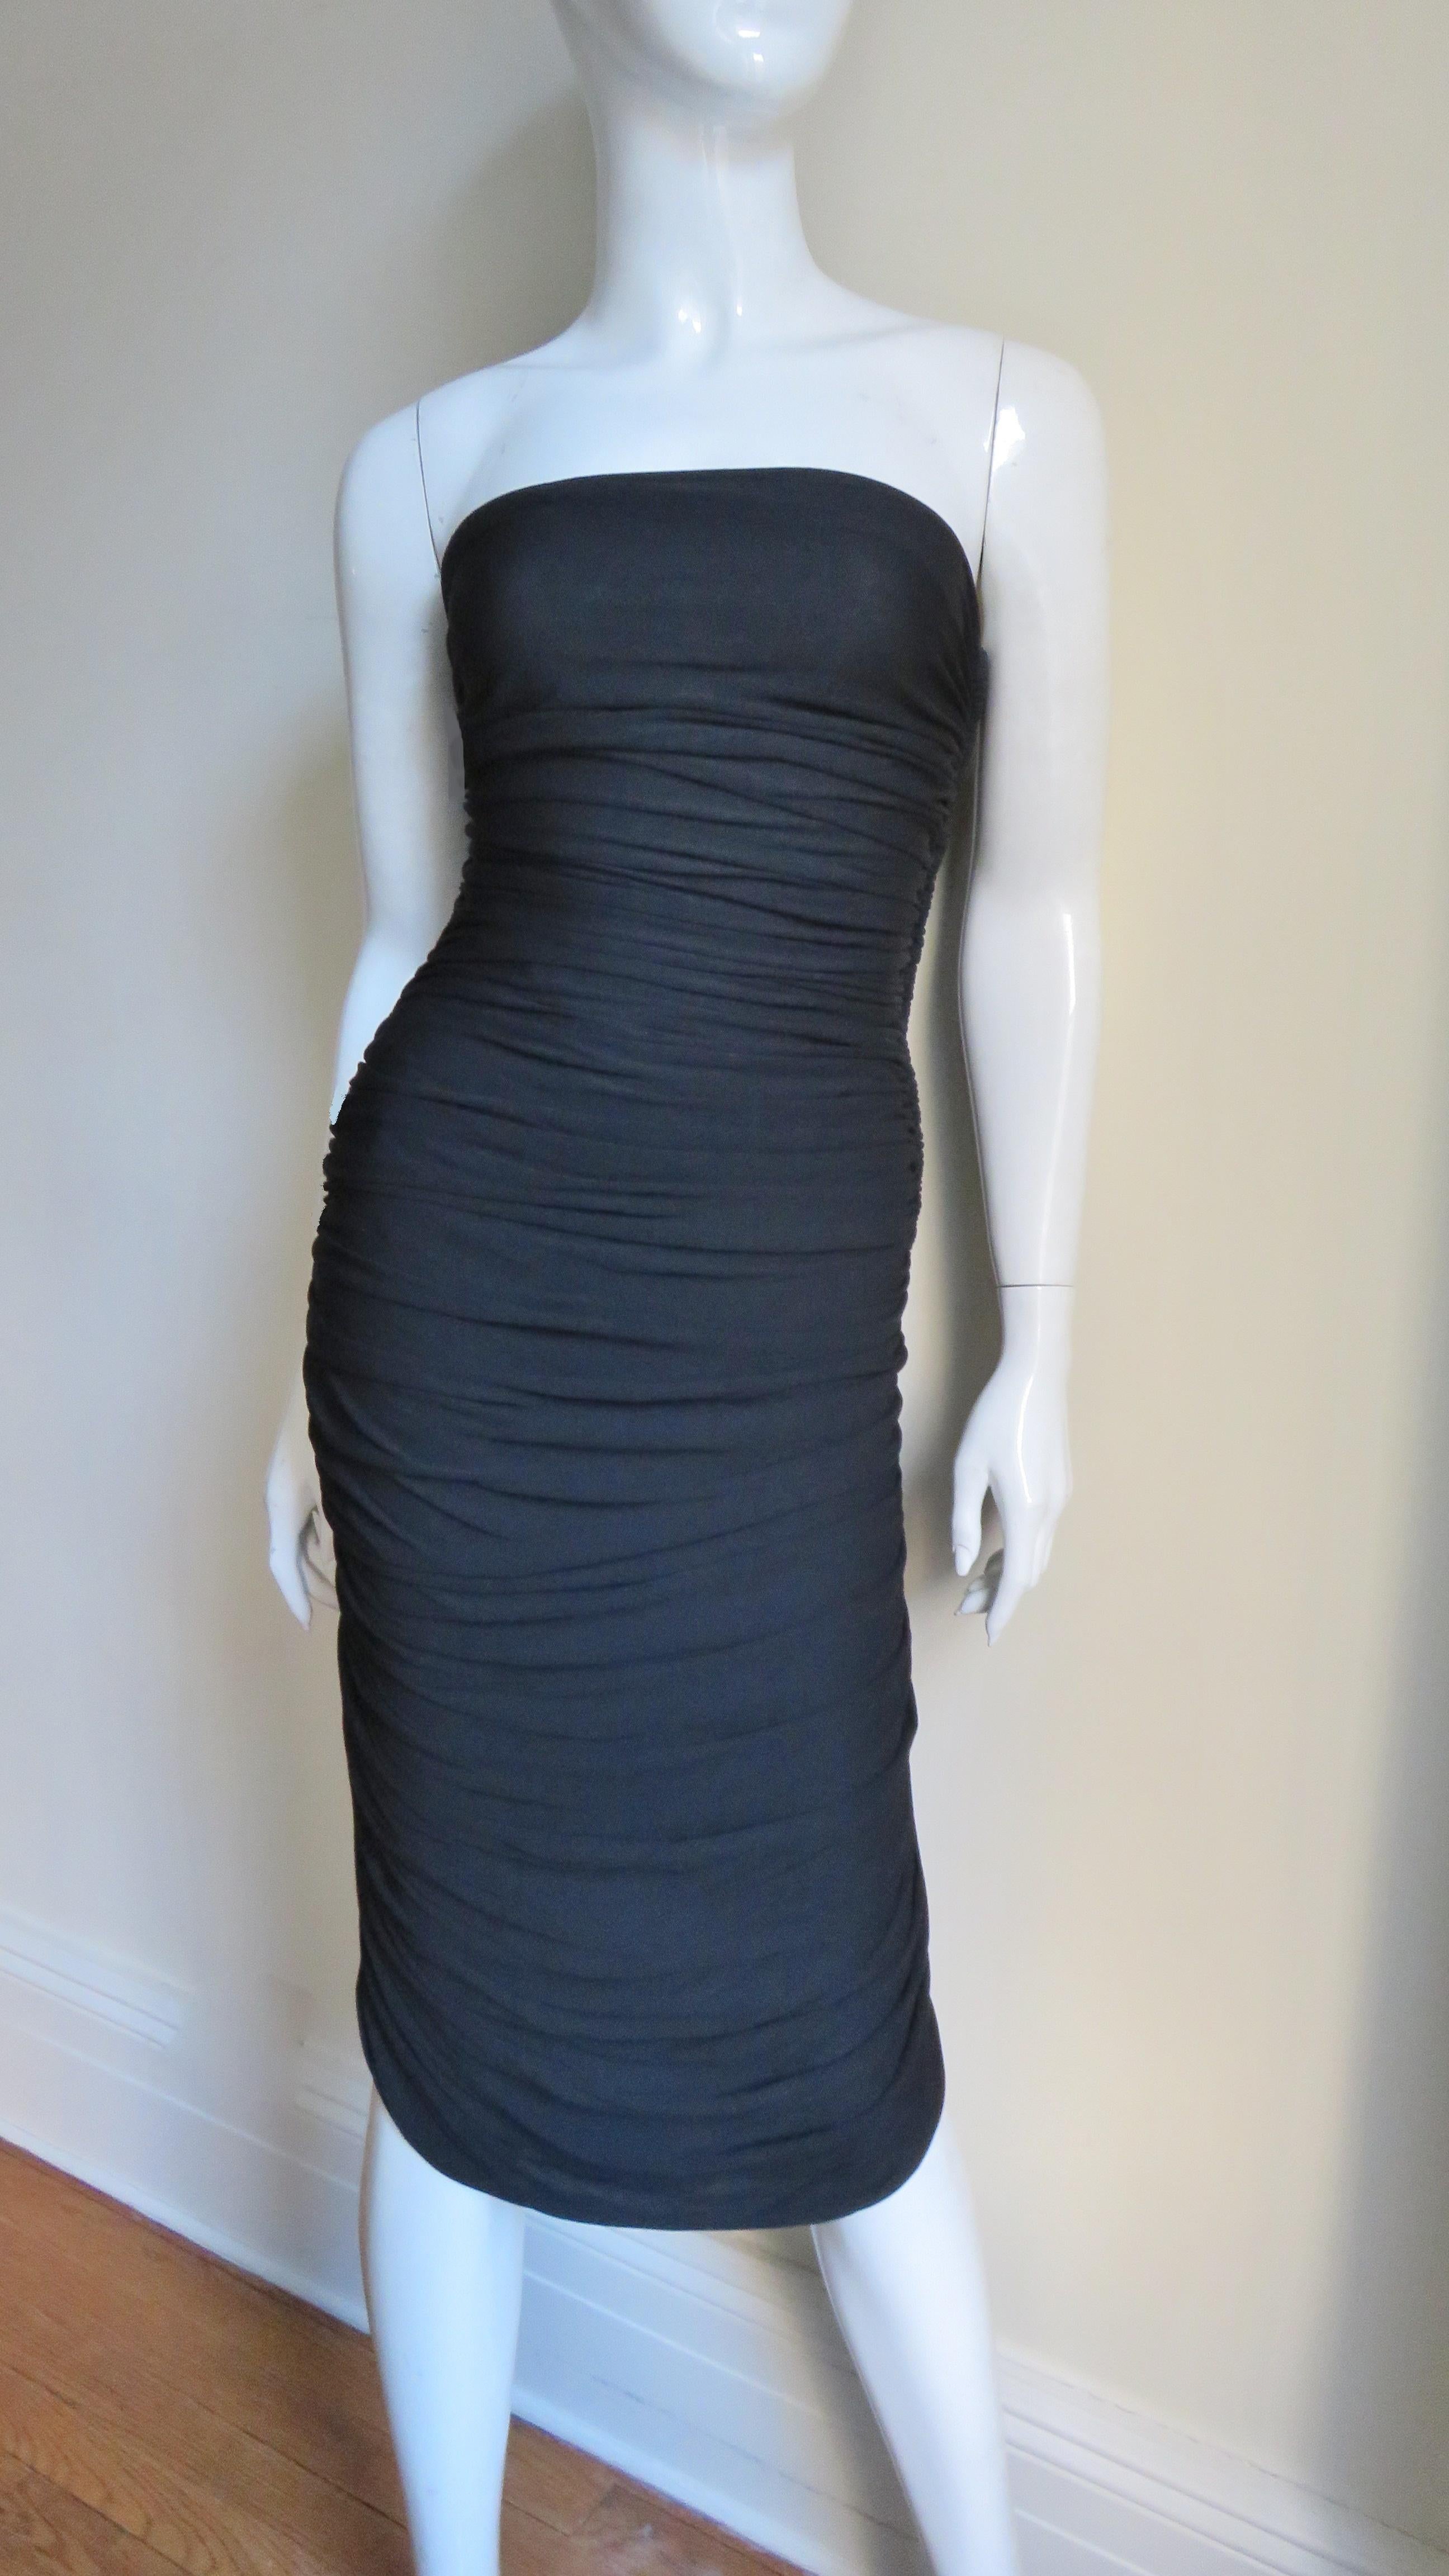 A pretty black slinky dress with stretch from Vicky Tiel.  It is strapless and horizontally ruched from top to bottom front and back. The bodice has side boning, a side zipper and the dress is lined. 
Fits sizes S, M. Marked French size 40.

Bust 